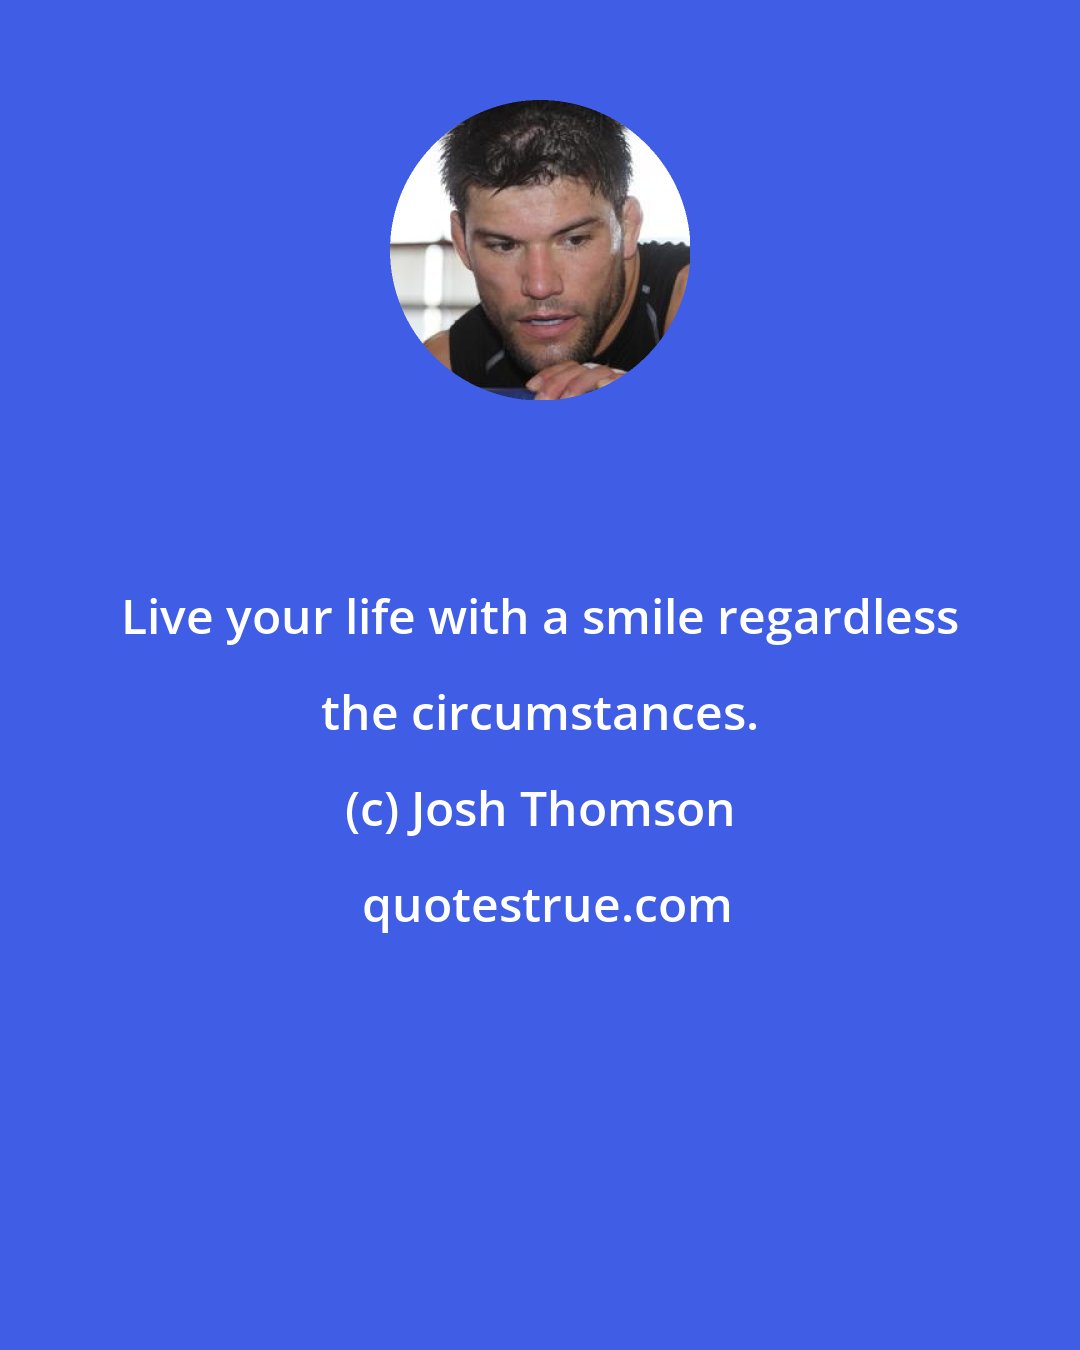 Josh Thomson: Live your life with a smile regardless the circumstances.